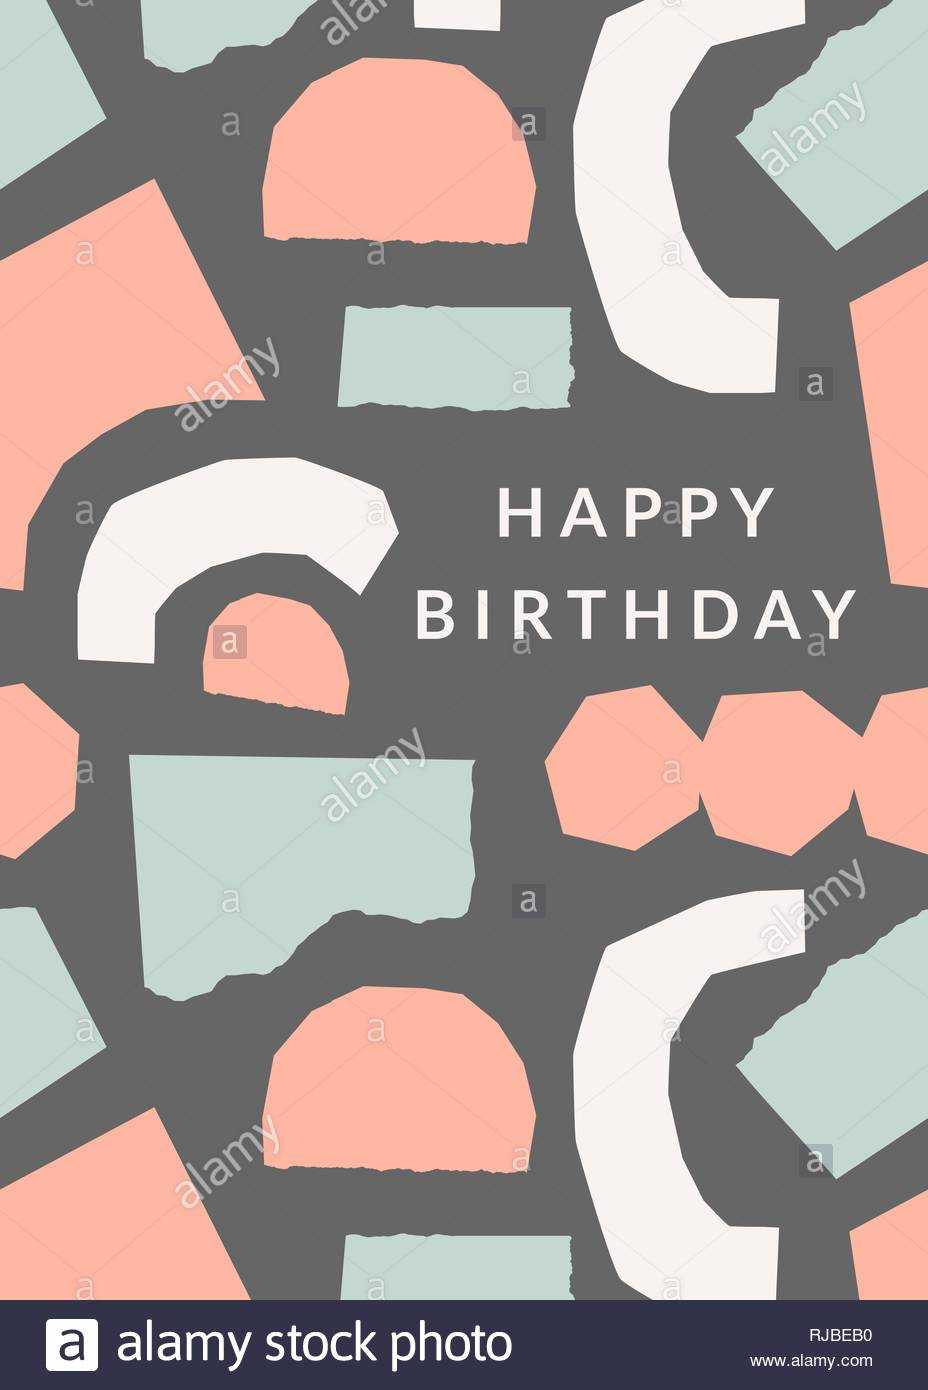 Greeting Card Template With Torn Paper Pieces In Pastel Intended For Birthday Card Collage Template